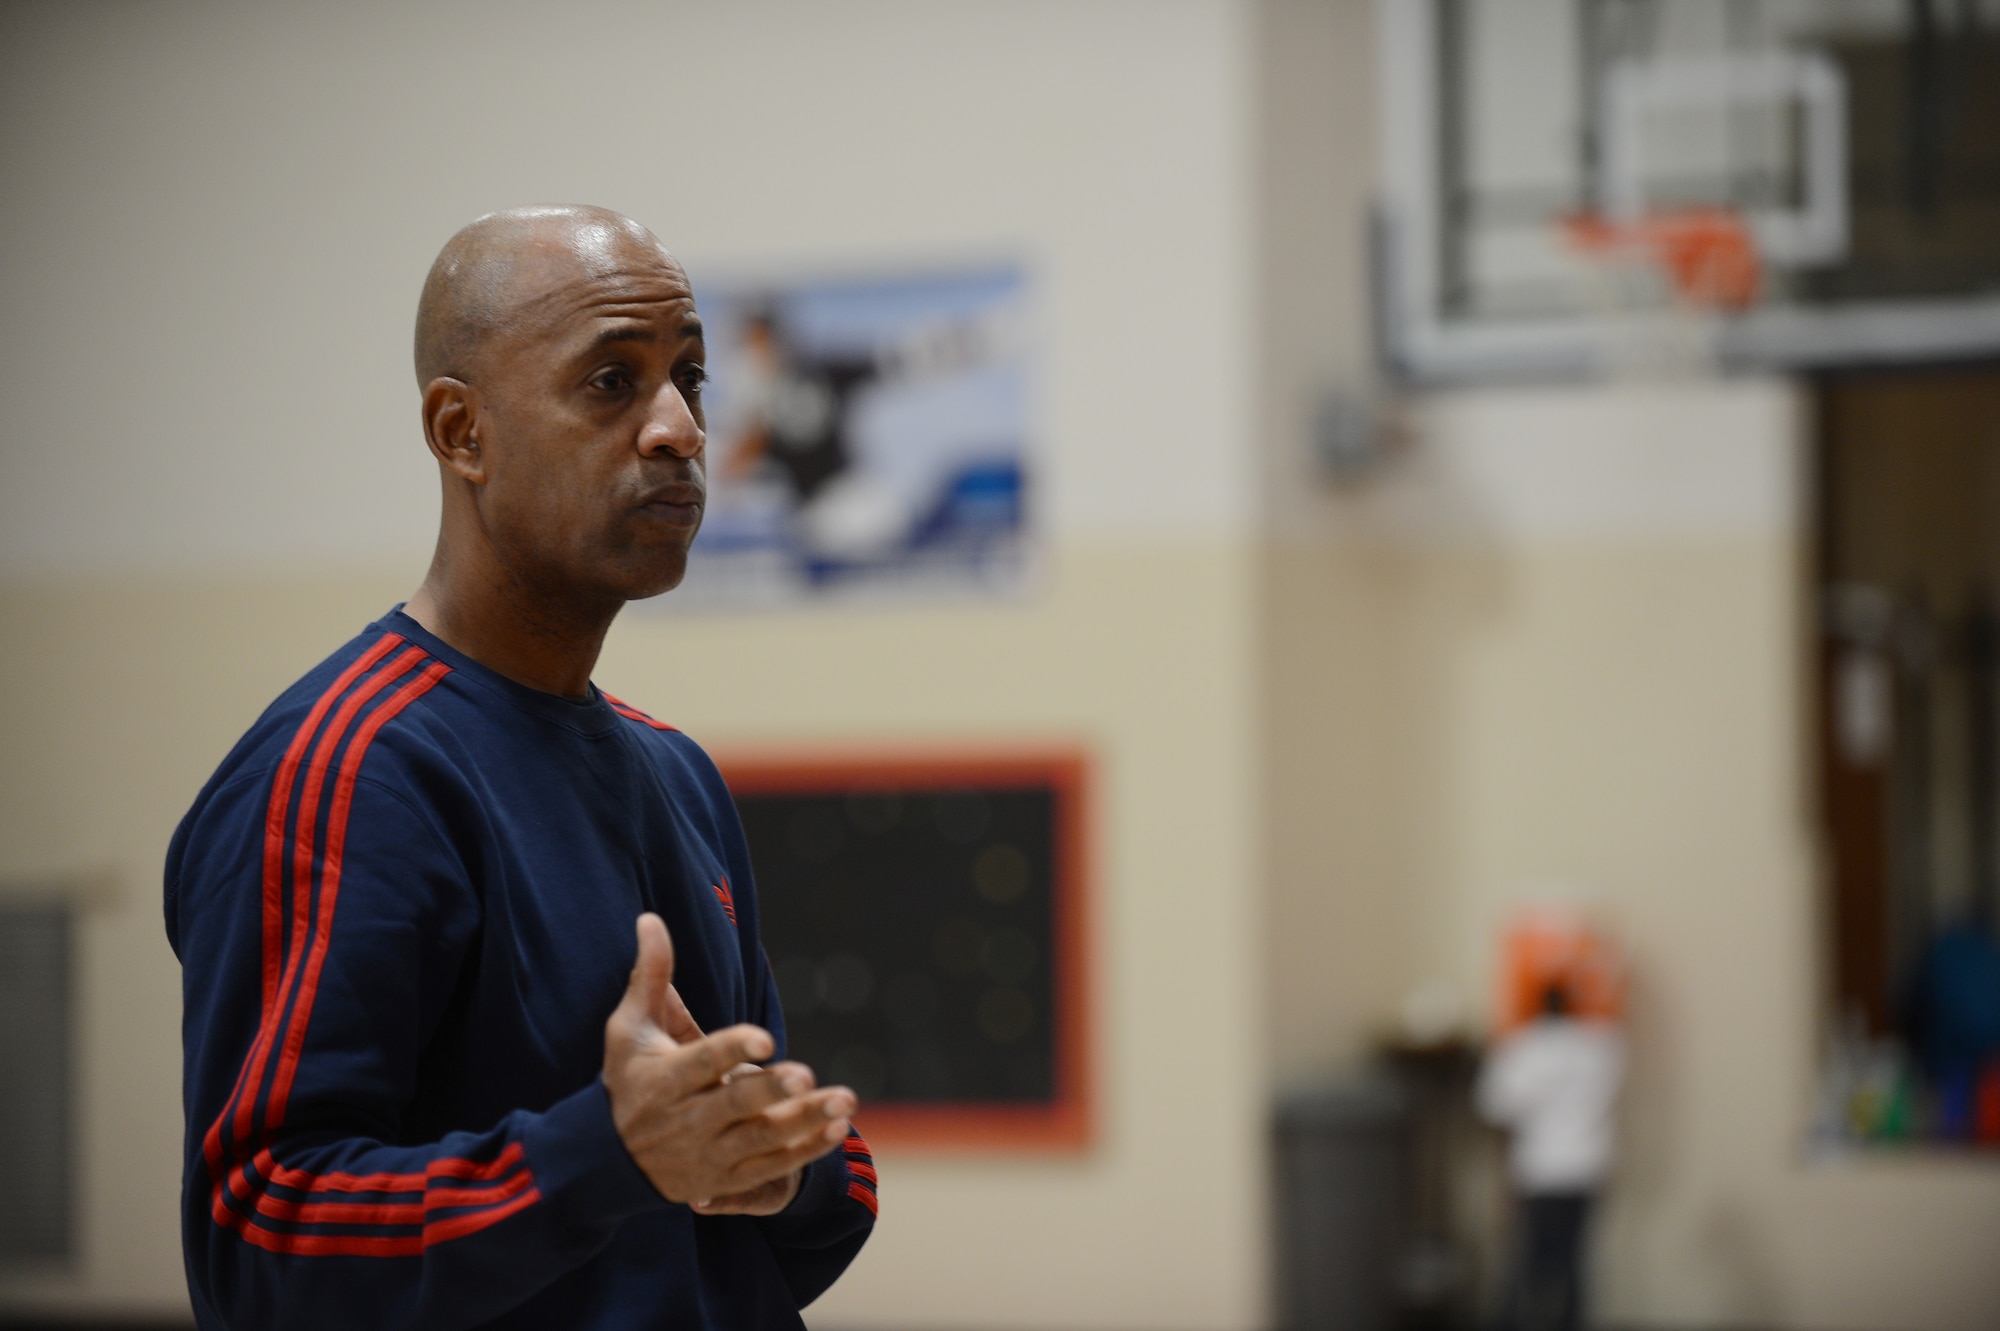 Derrick Stafford, National Basketball Association referee, speaks to kids at the Shaw Air Force Base youth center, S.C., Dec. 14, 2012.  Stafford is in his 25th NBA season and has served twice on the executive board of the NBA Referee Association.  (U.S. Air Force photo by Airman 1st Class Nicole Sikorski/Released)